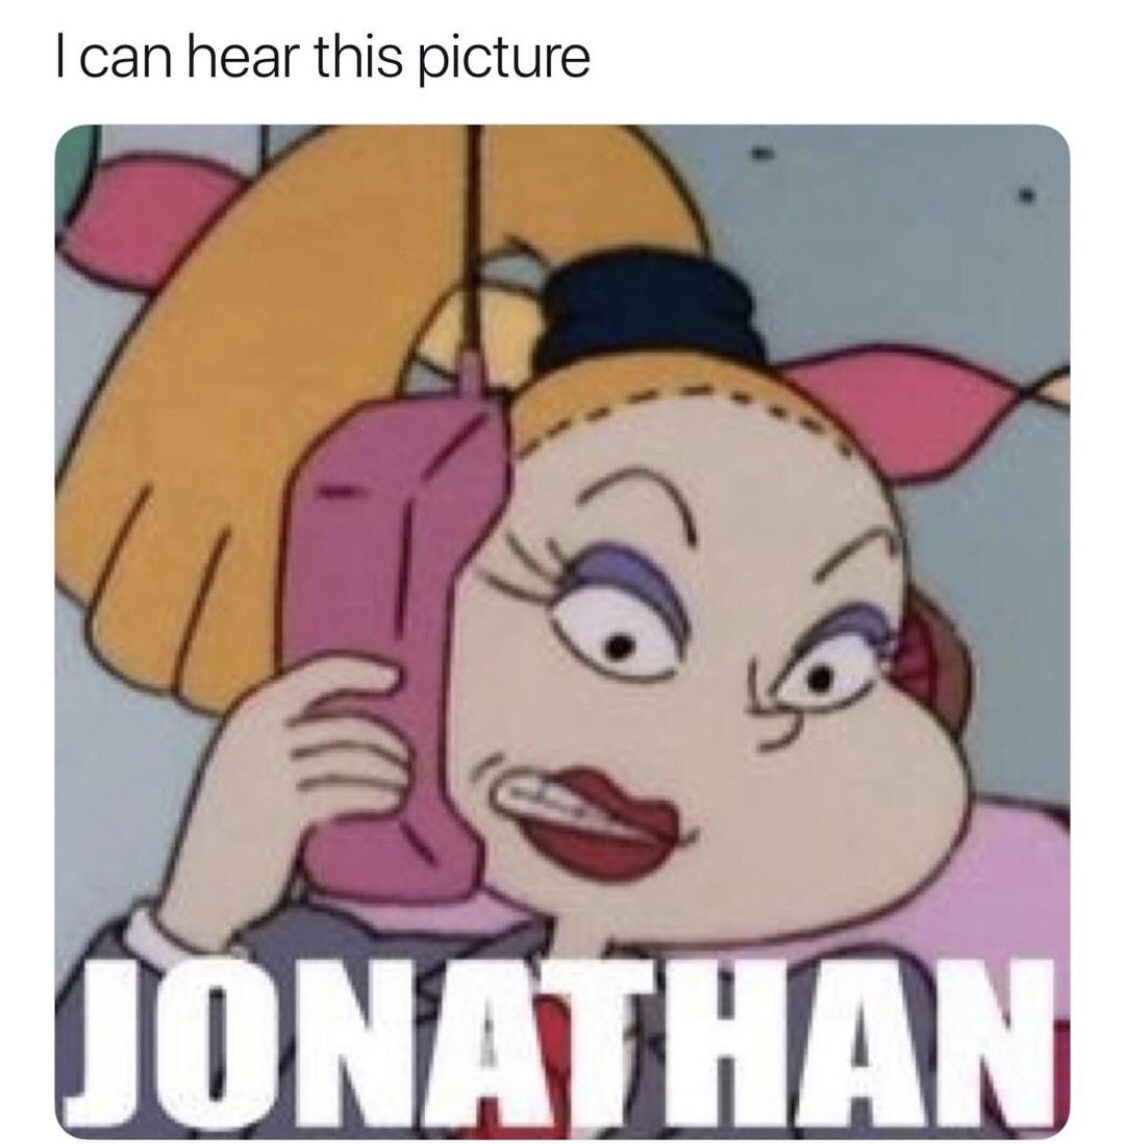 angelica mom - I can hear this picture Jonathan